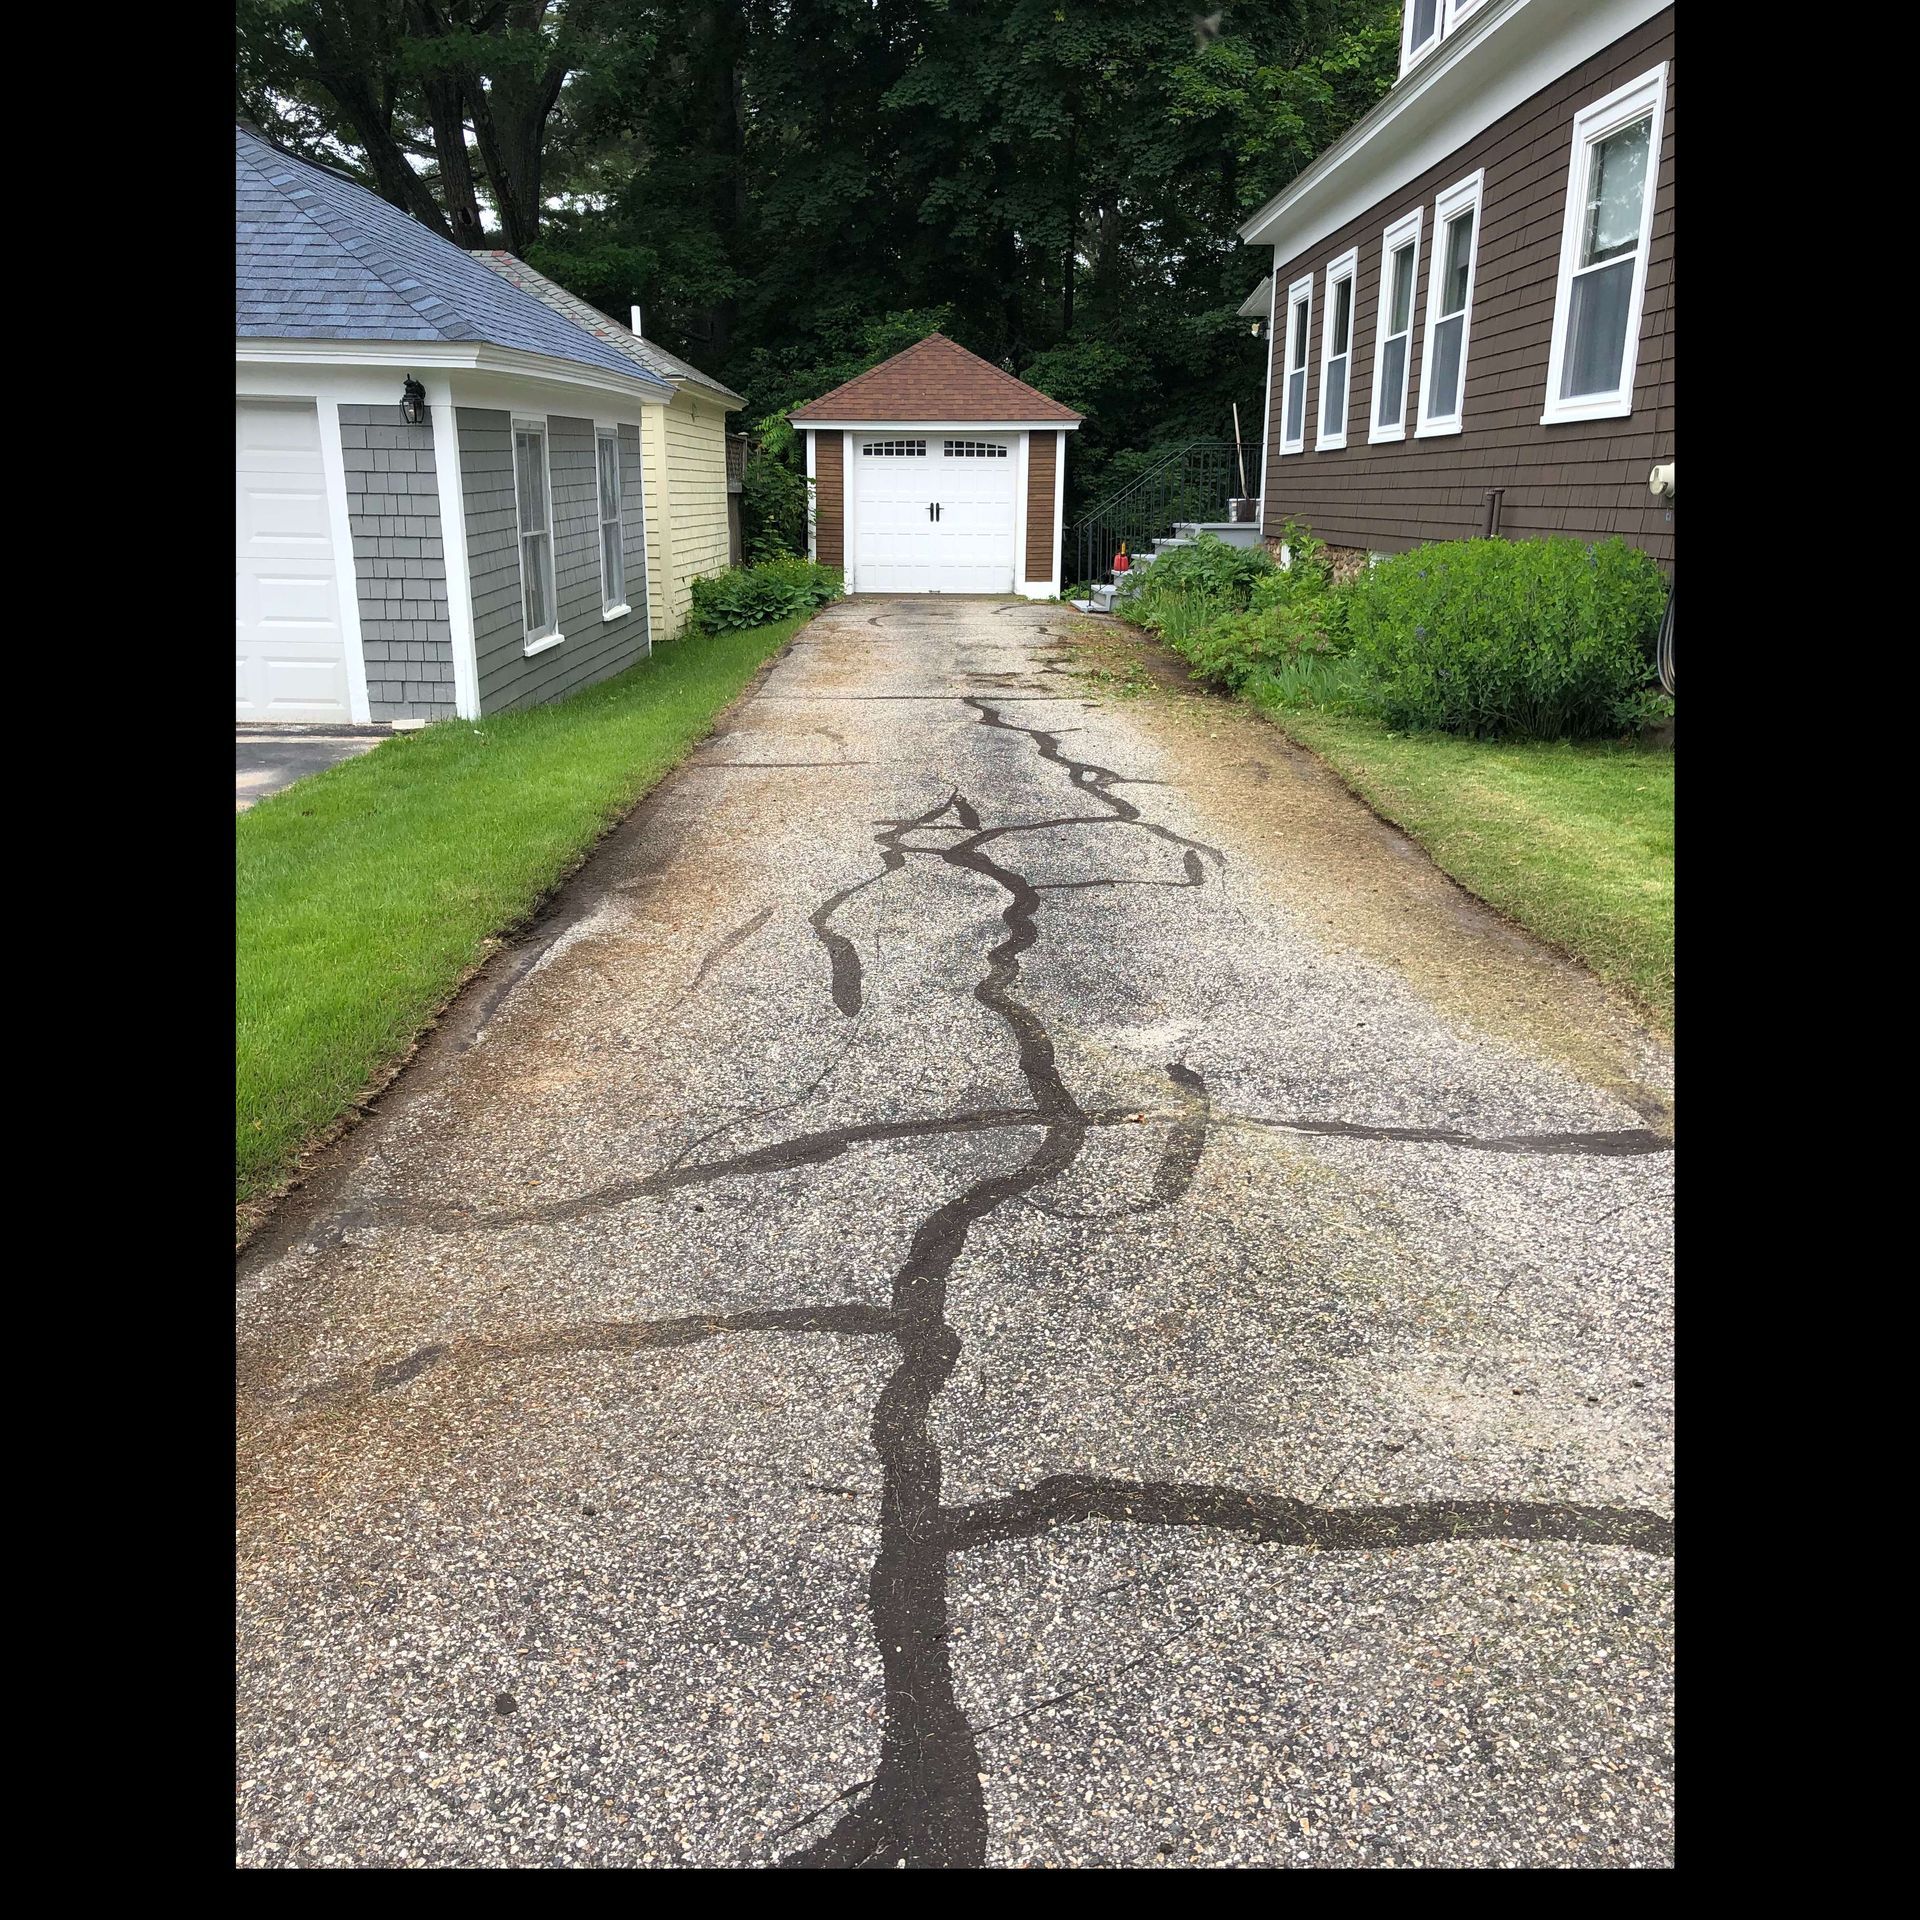 A cracked driveway leading to a house with a garage.